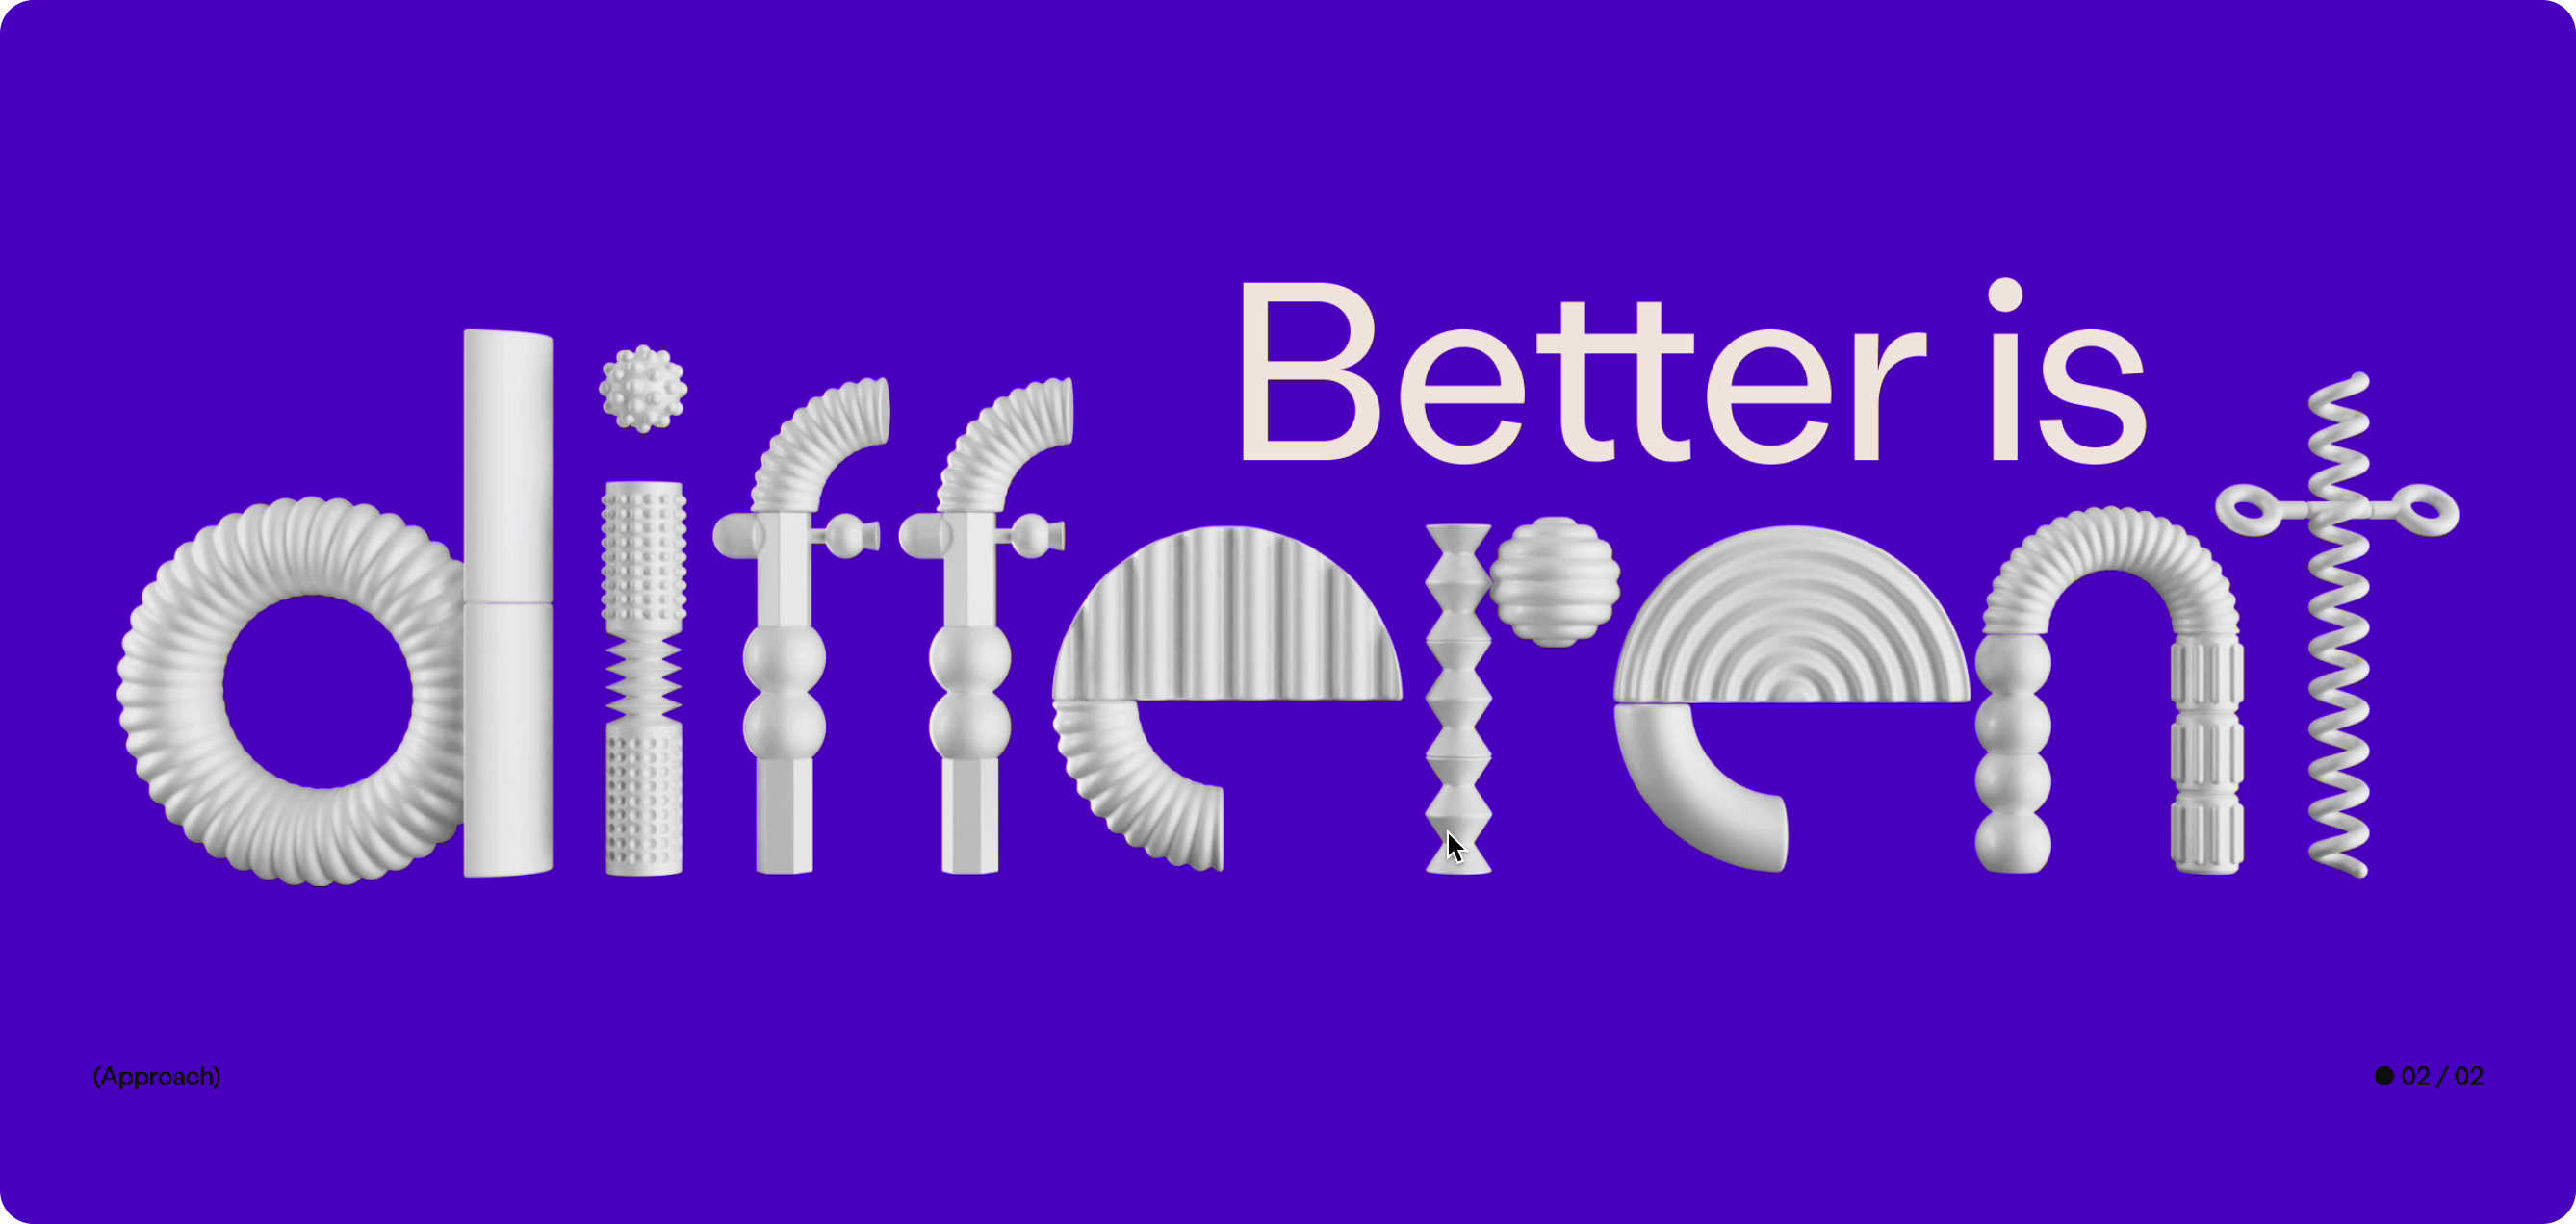 The word "different" is constructed of soft, white 3D shapes on a purple background